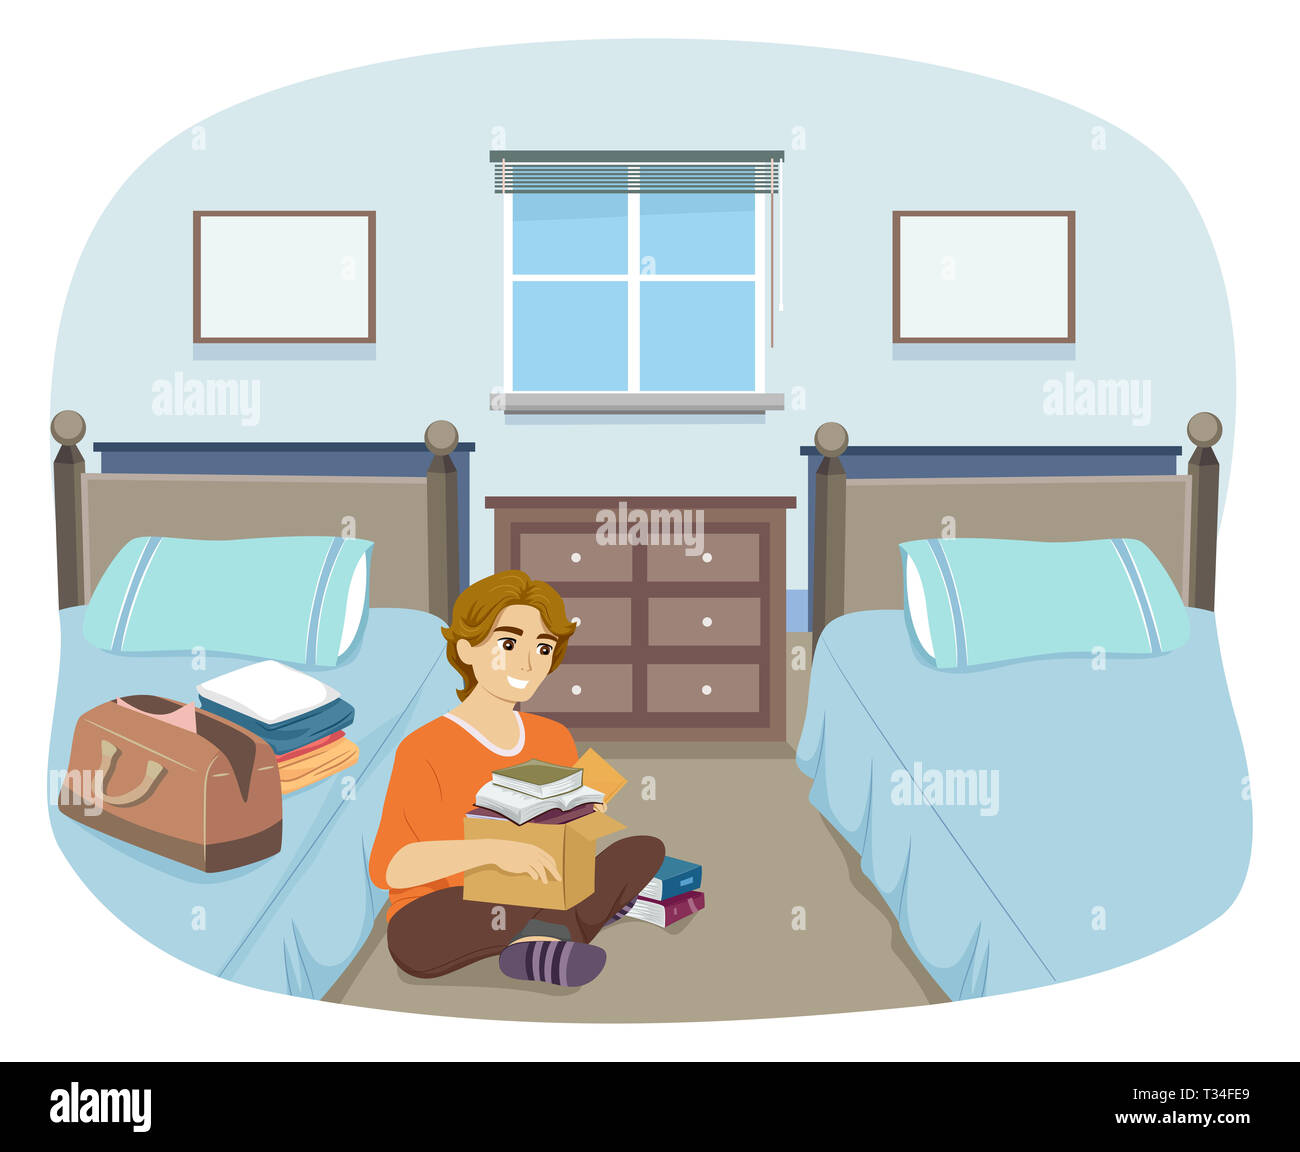 Illustration of a Teenage Guy Unpacking Books and Clothes in His Dorm Room Stock Photo